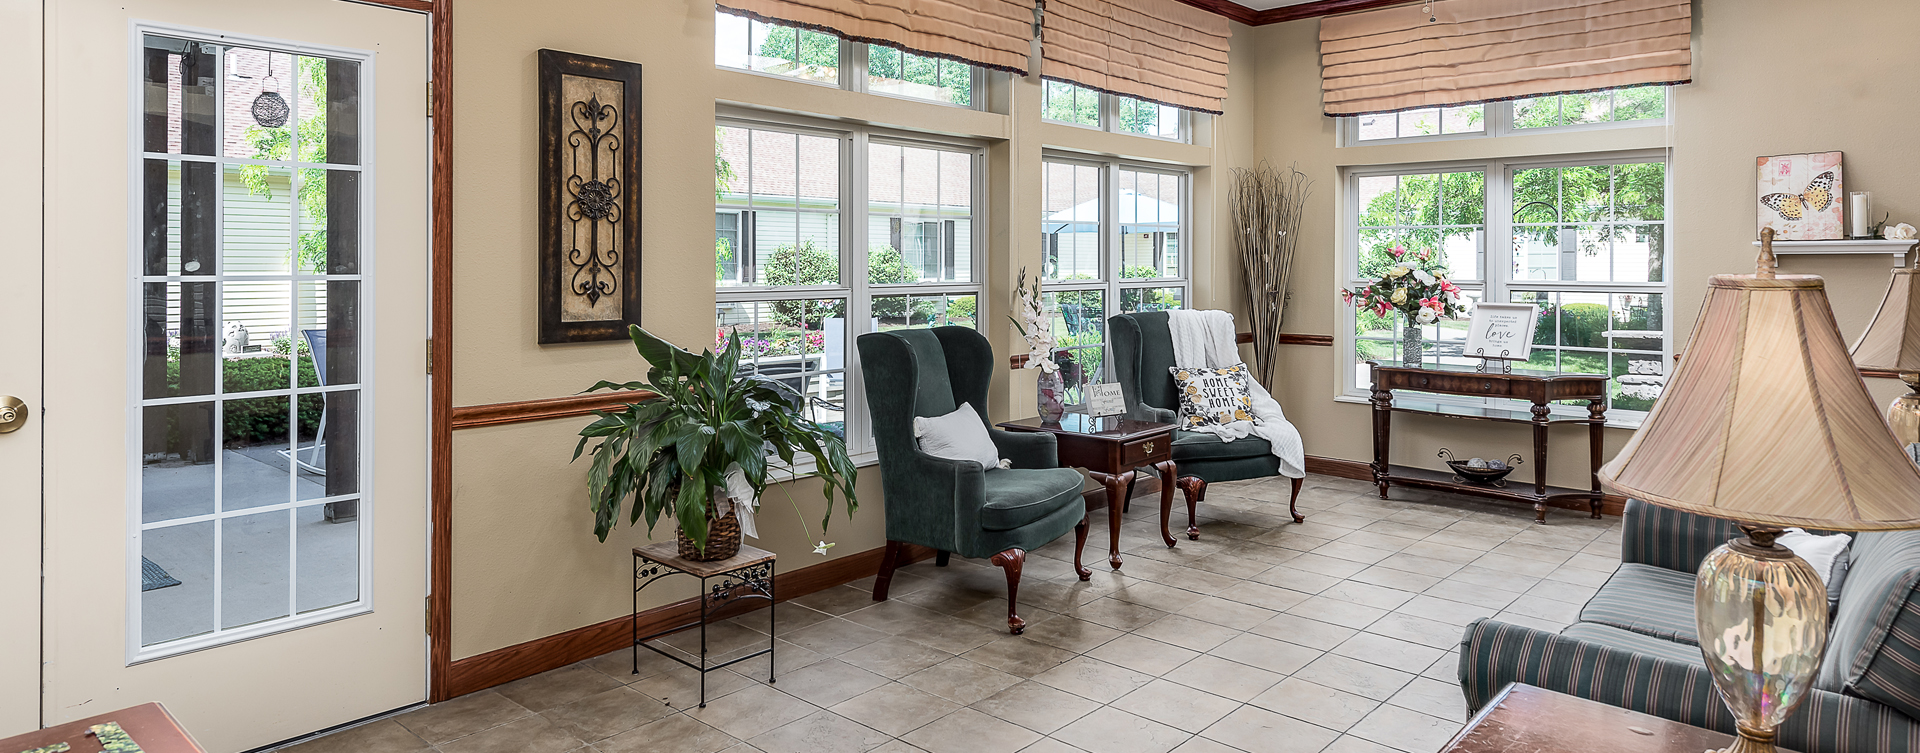 Enjoy the view of the outdoors from the sunroom at Bickford of Midland